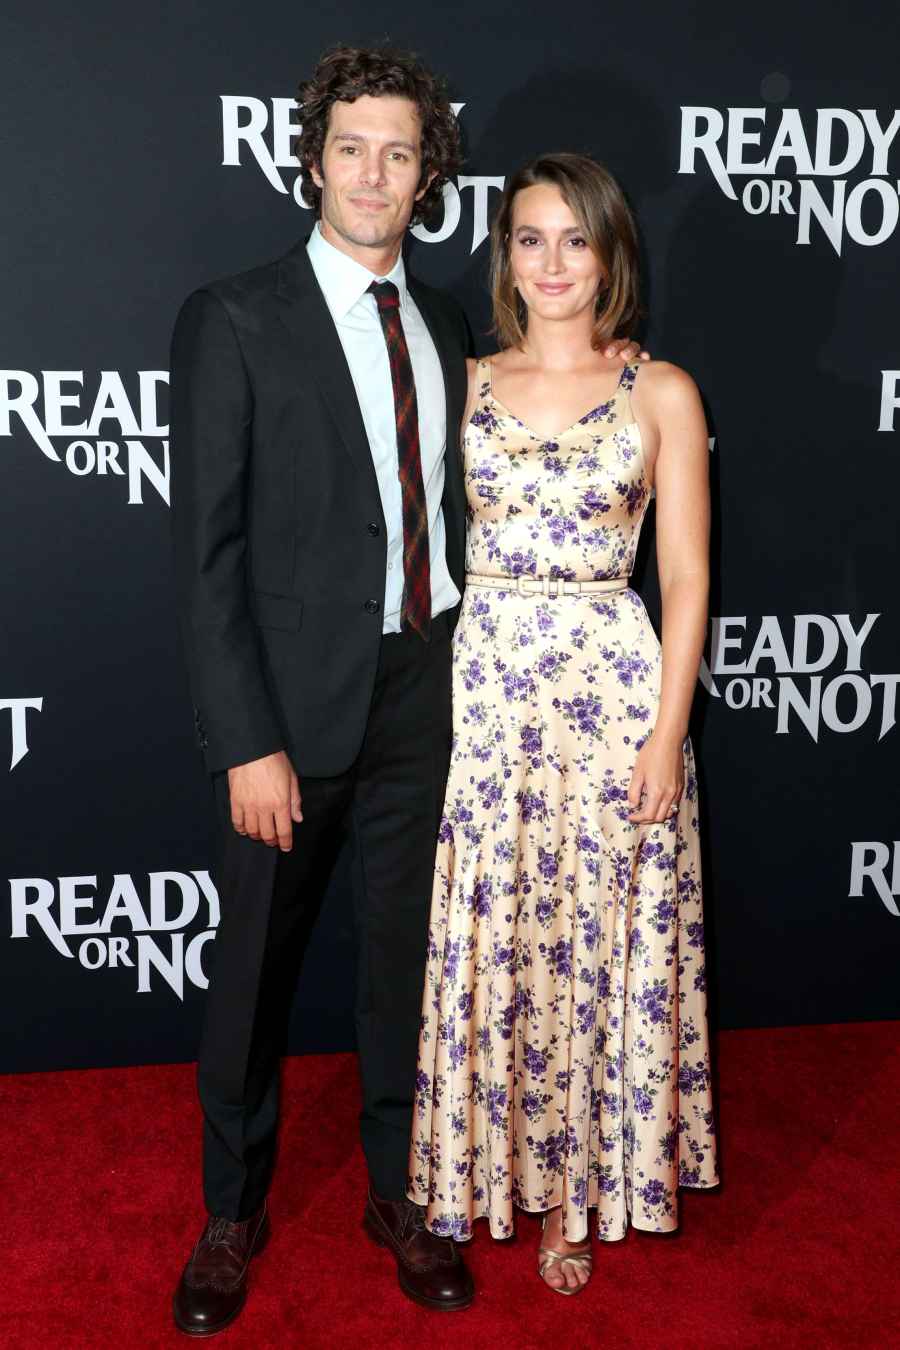 Adam Brody and Leighton Meester Make a Rare Red Carpet Appearance